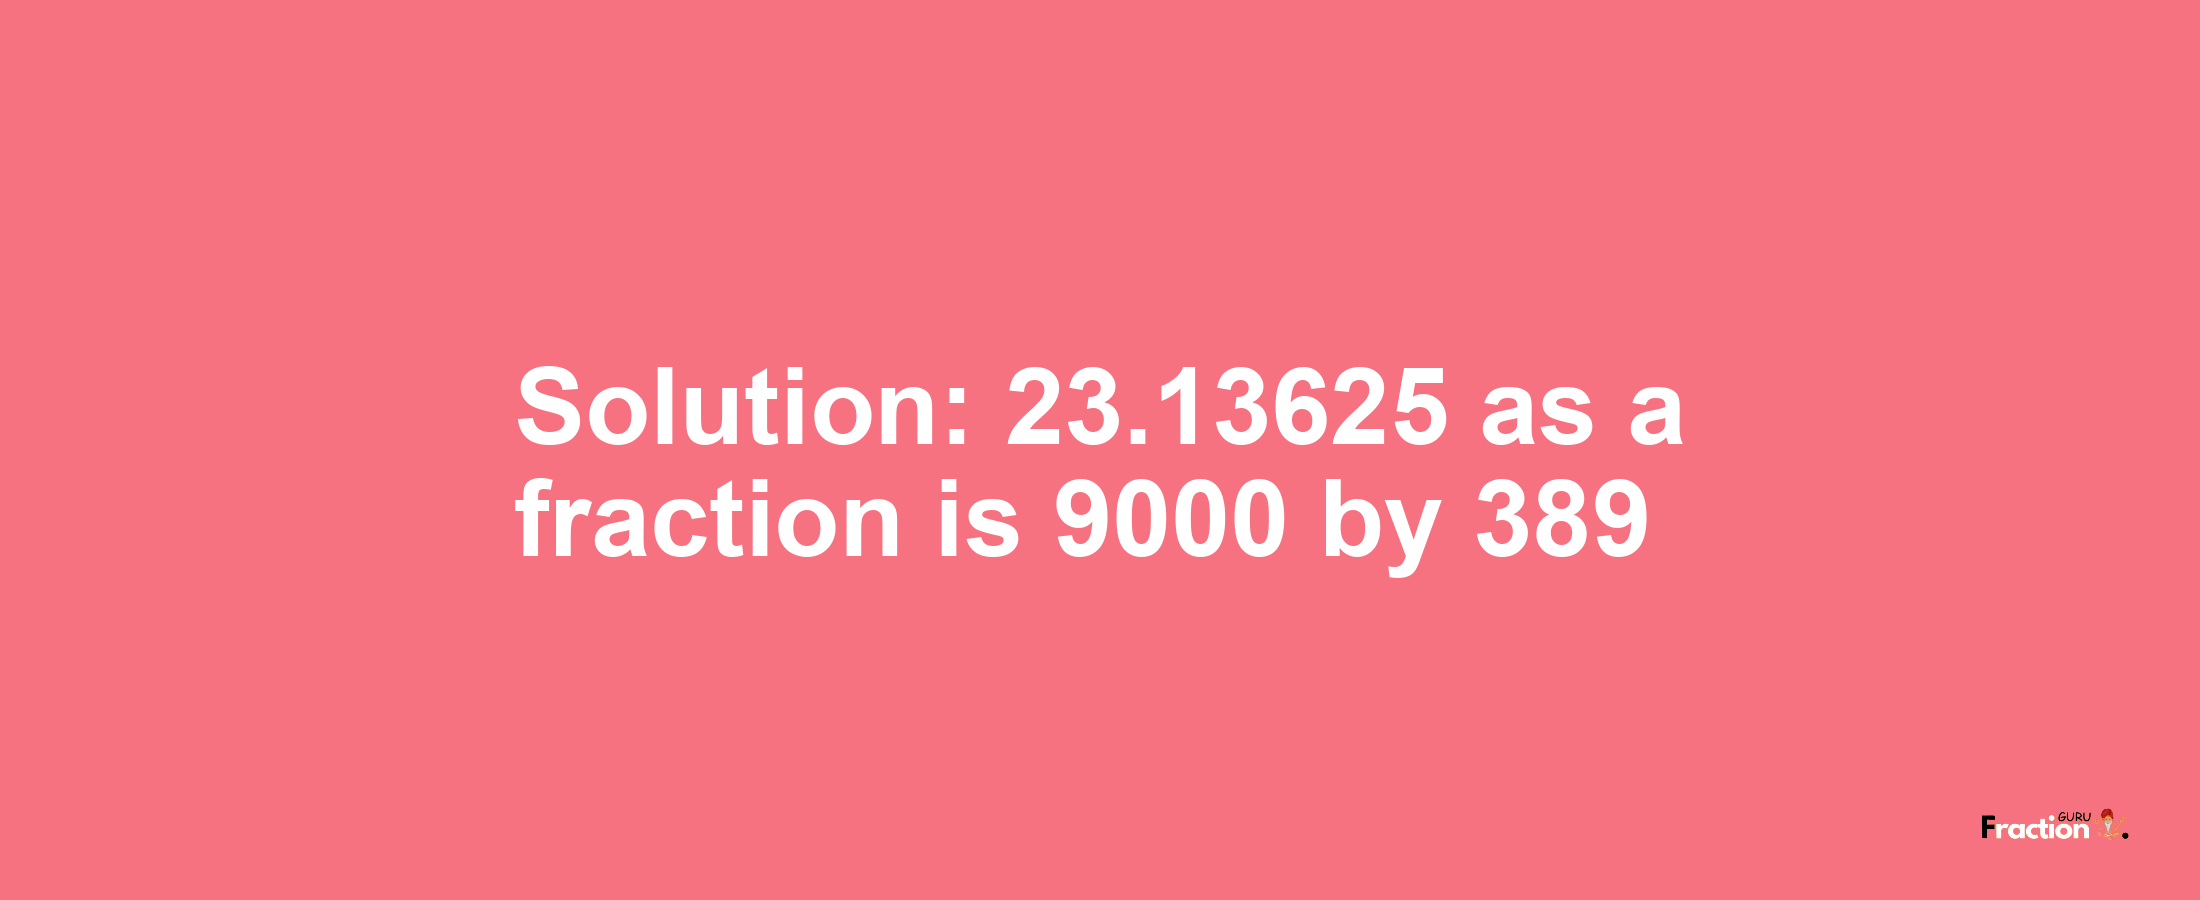 Solution:23.13625 as a fraction is 9000/389